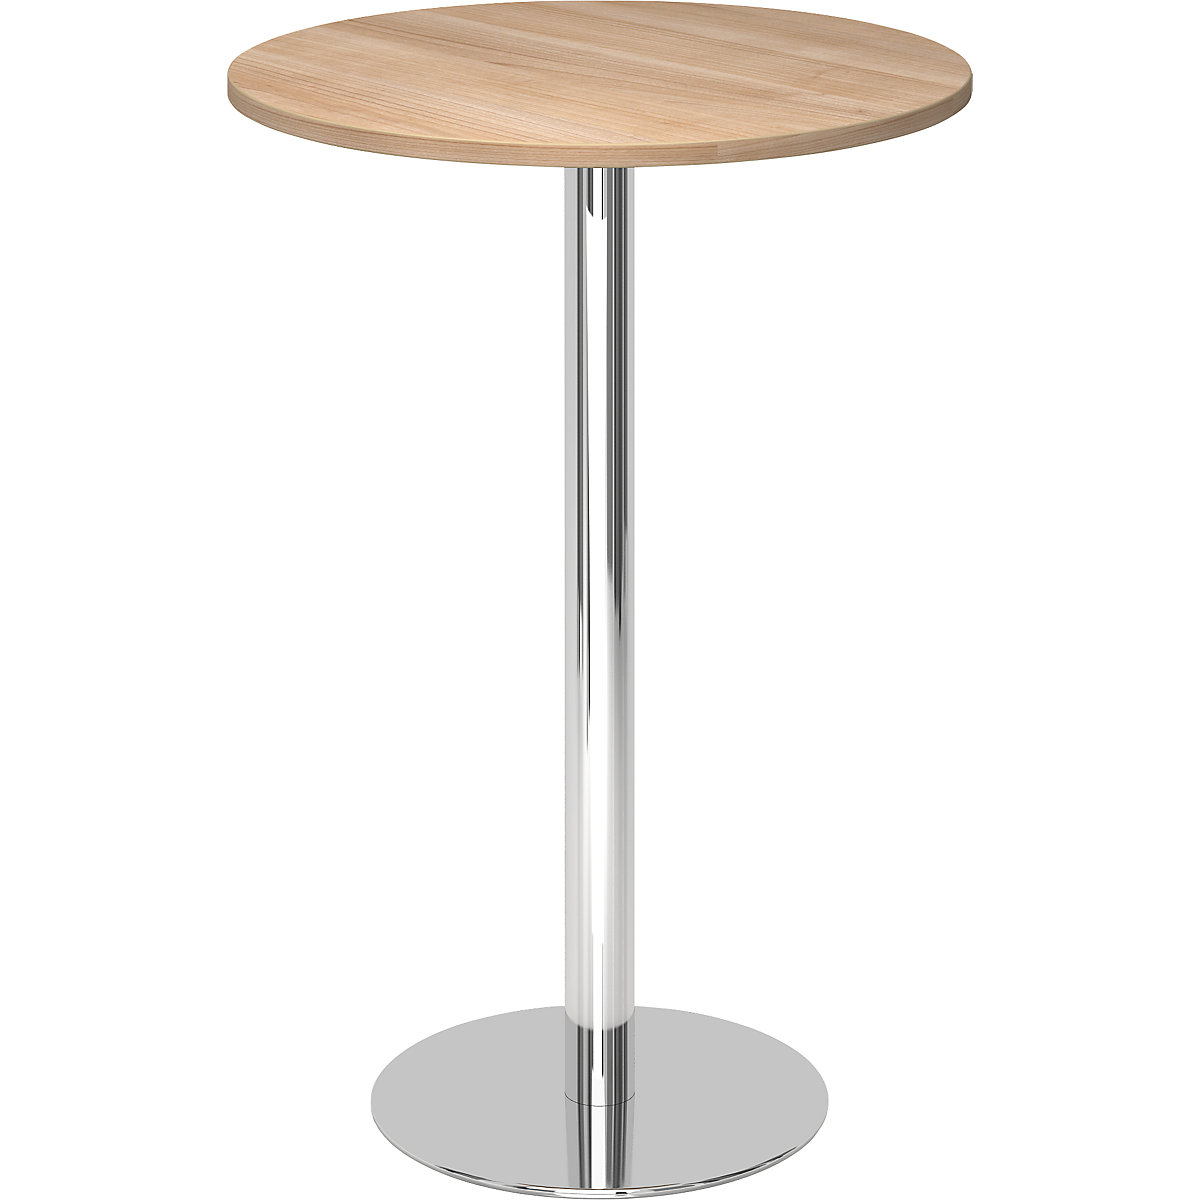 Pedestal table, Ø 800 mm, 1116 mm high, chrome plated frame, tabletop in walnut finish-4